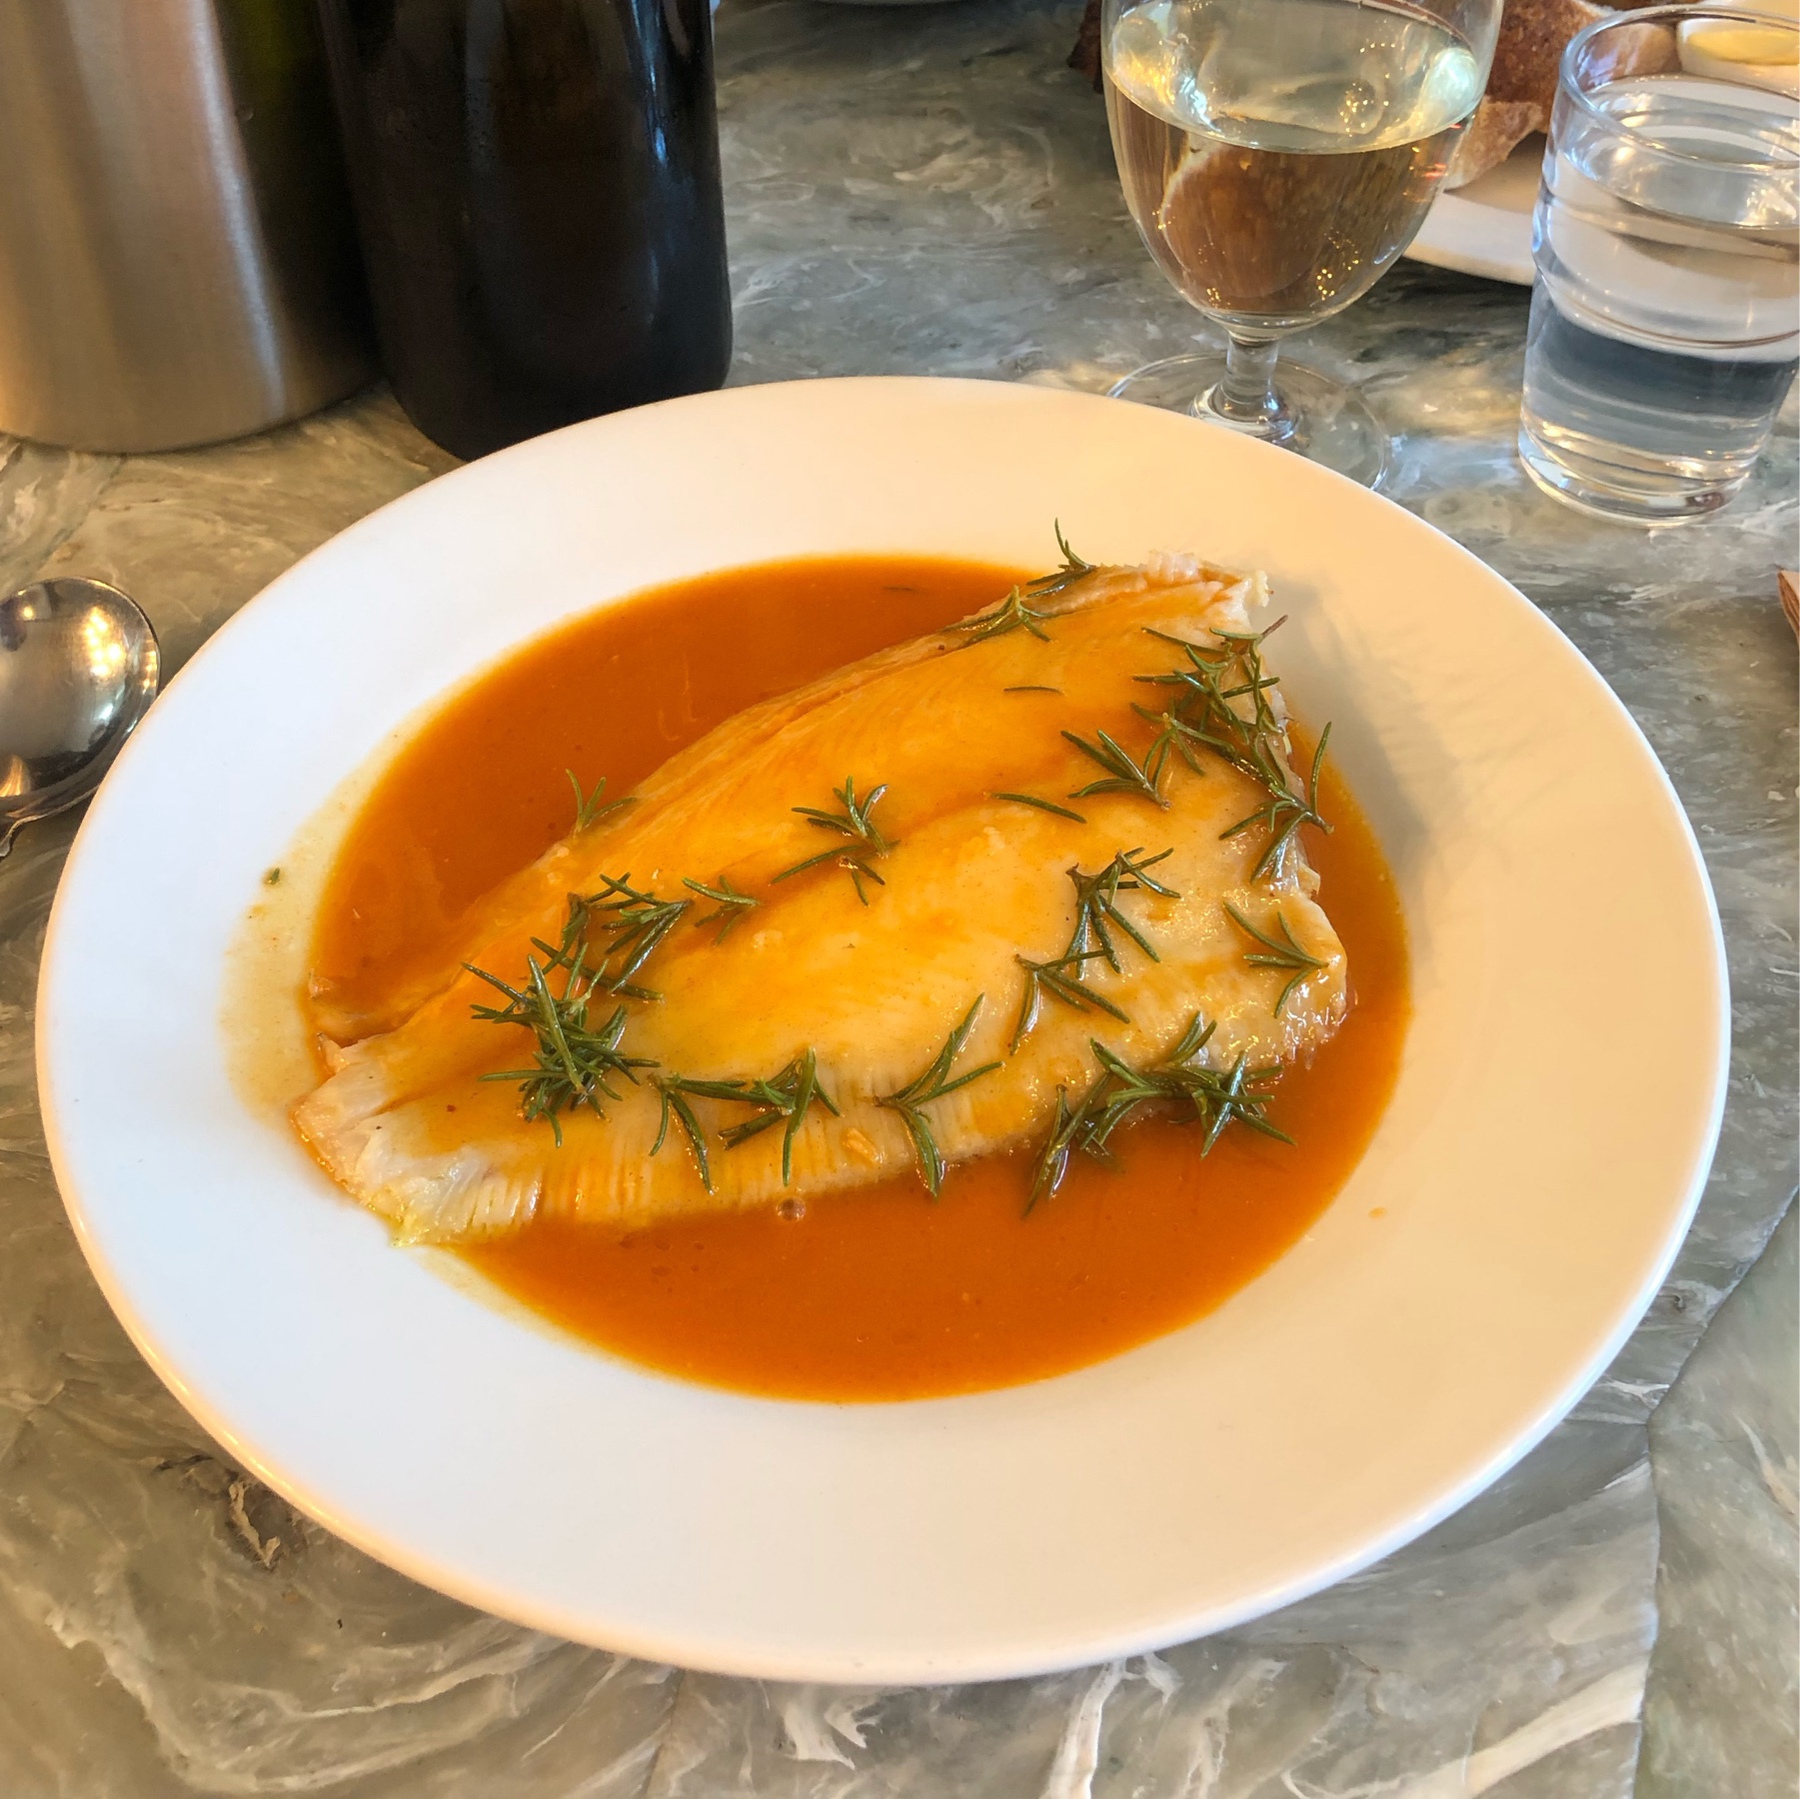 Sea bream on a paprika butter with rosemary on top in a white plate